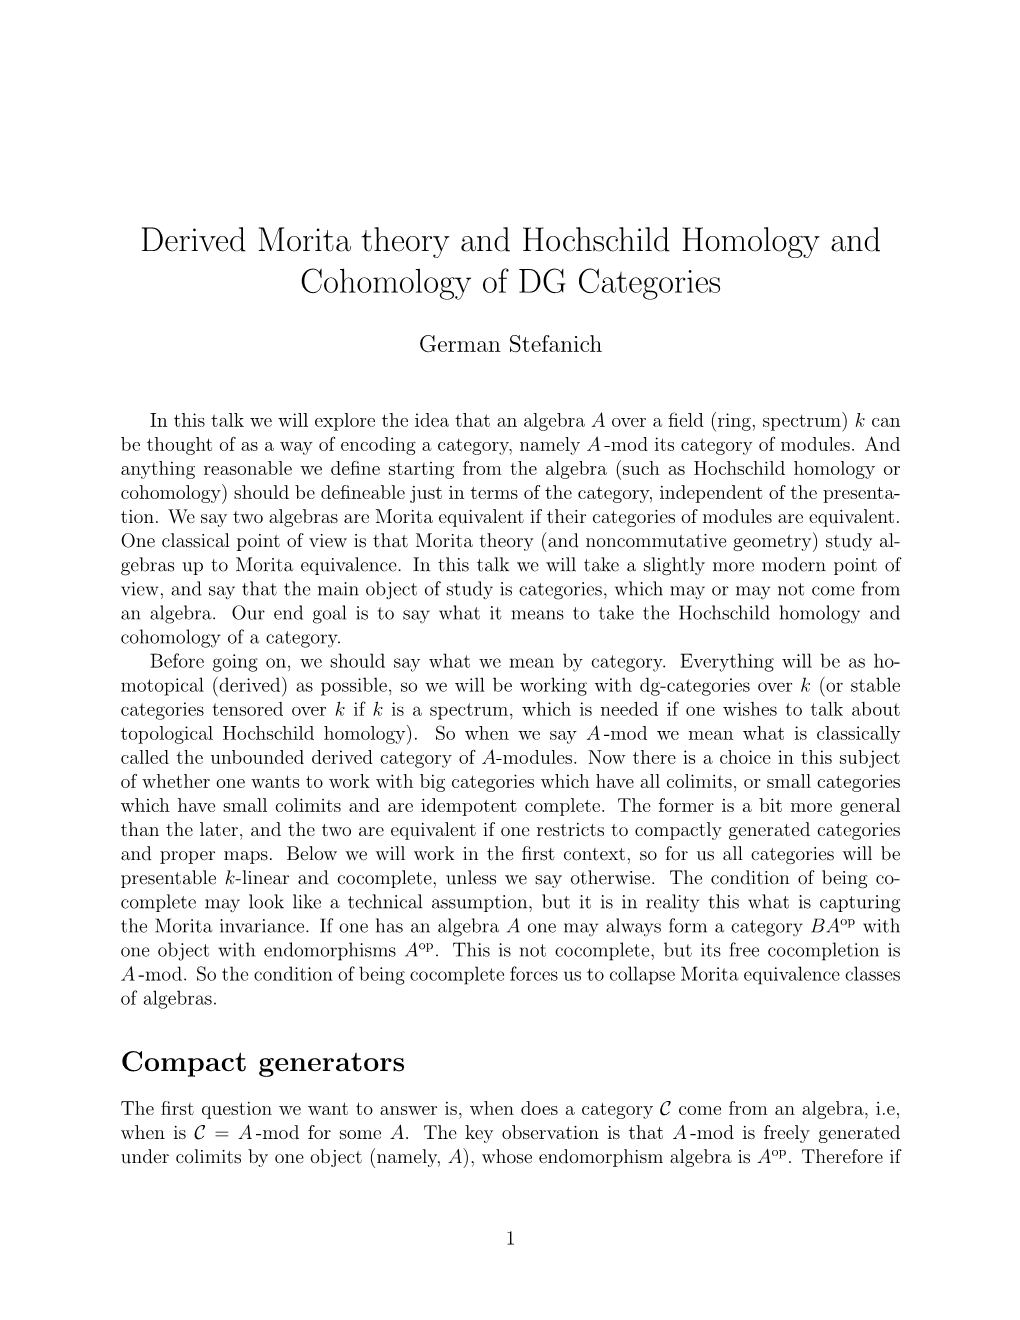 Derived Morita Theory and Hochschild Homology and Cohomology of DG Categories